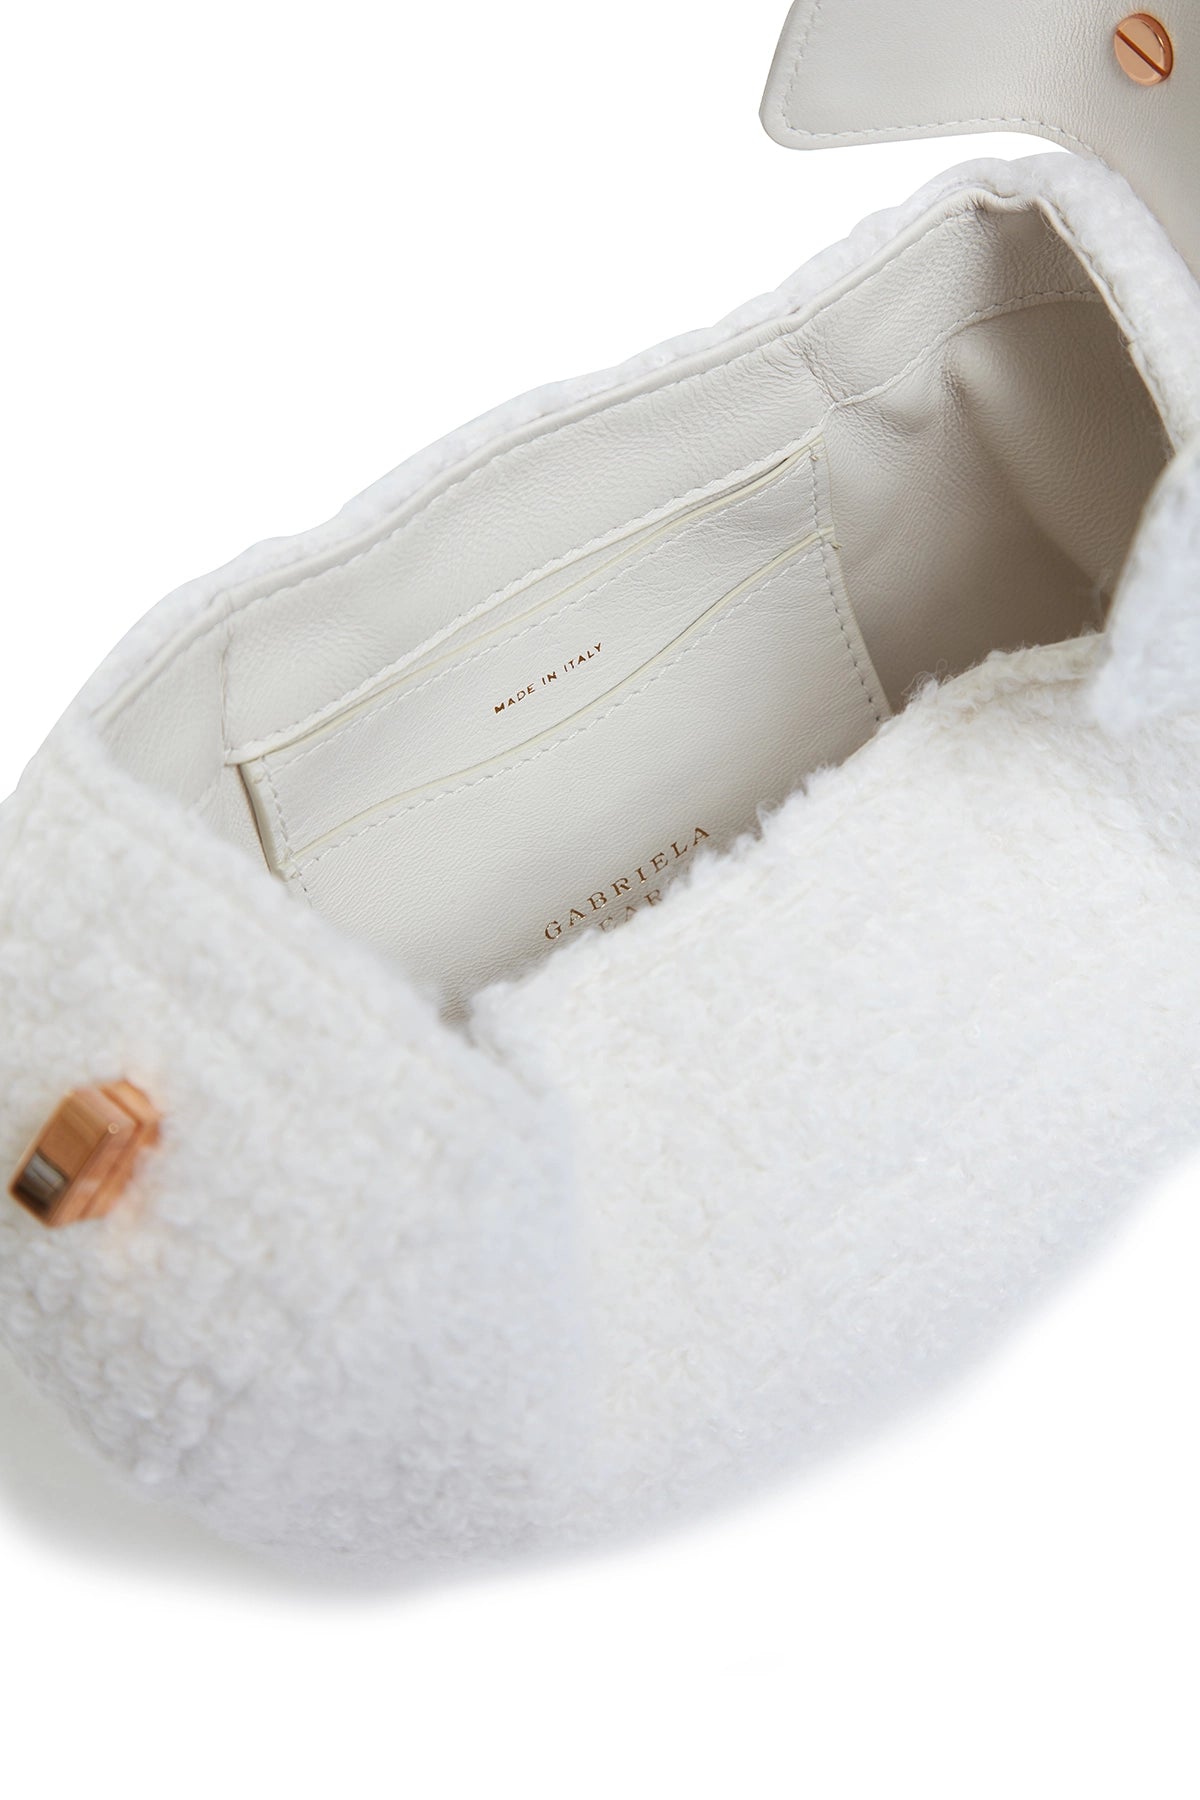 Demi Bag in Ivory Cashmere Boucle